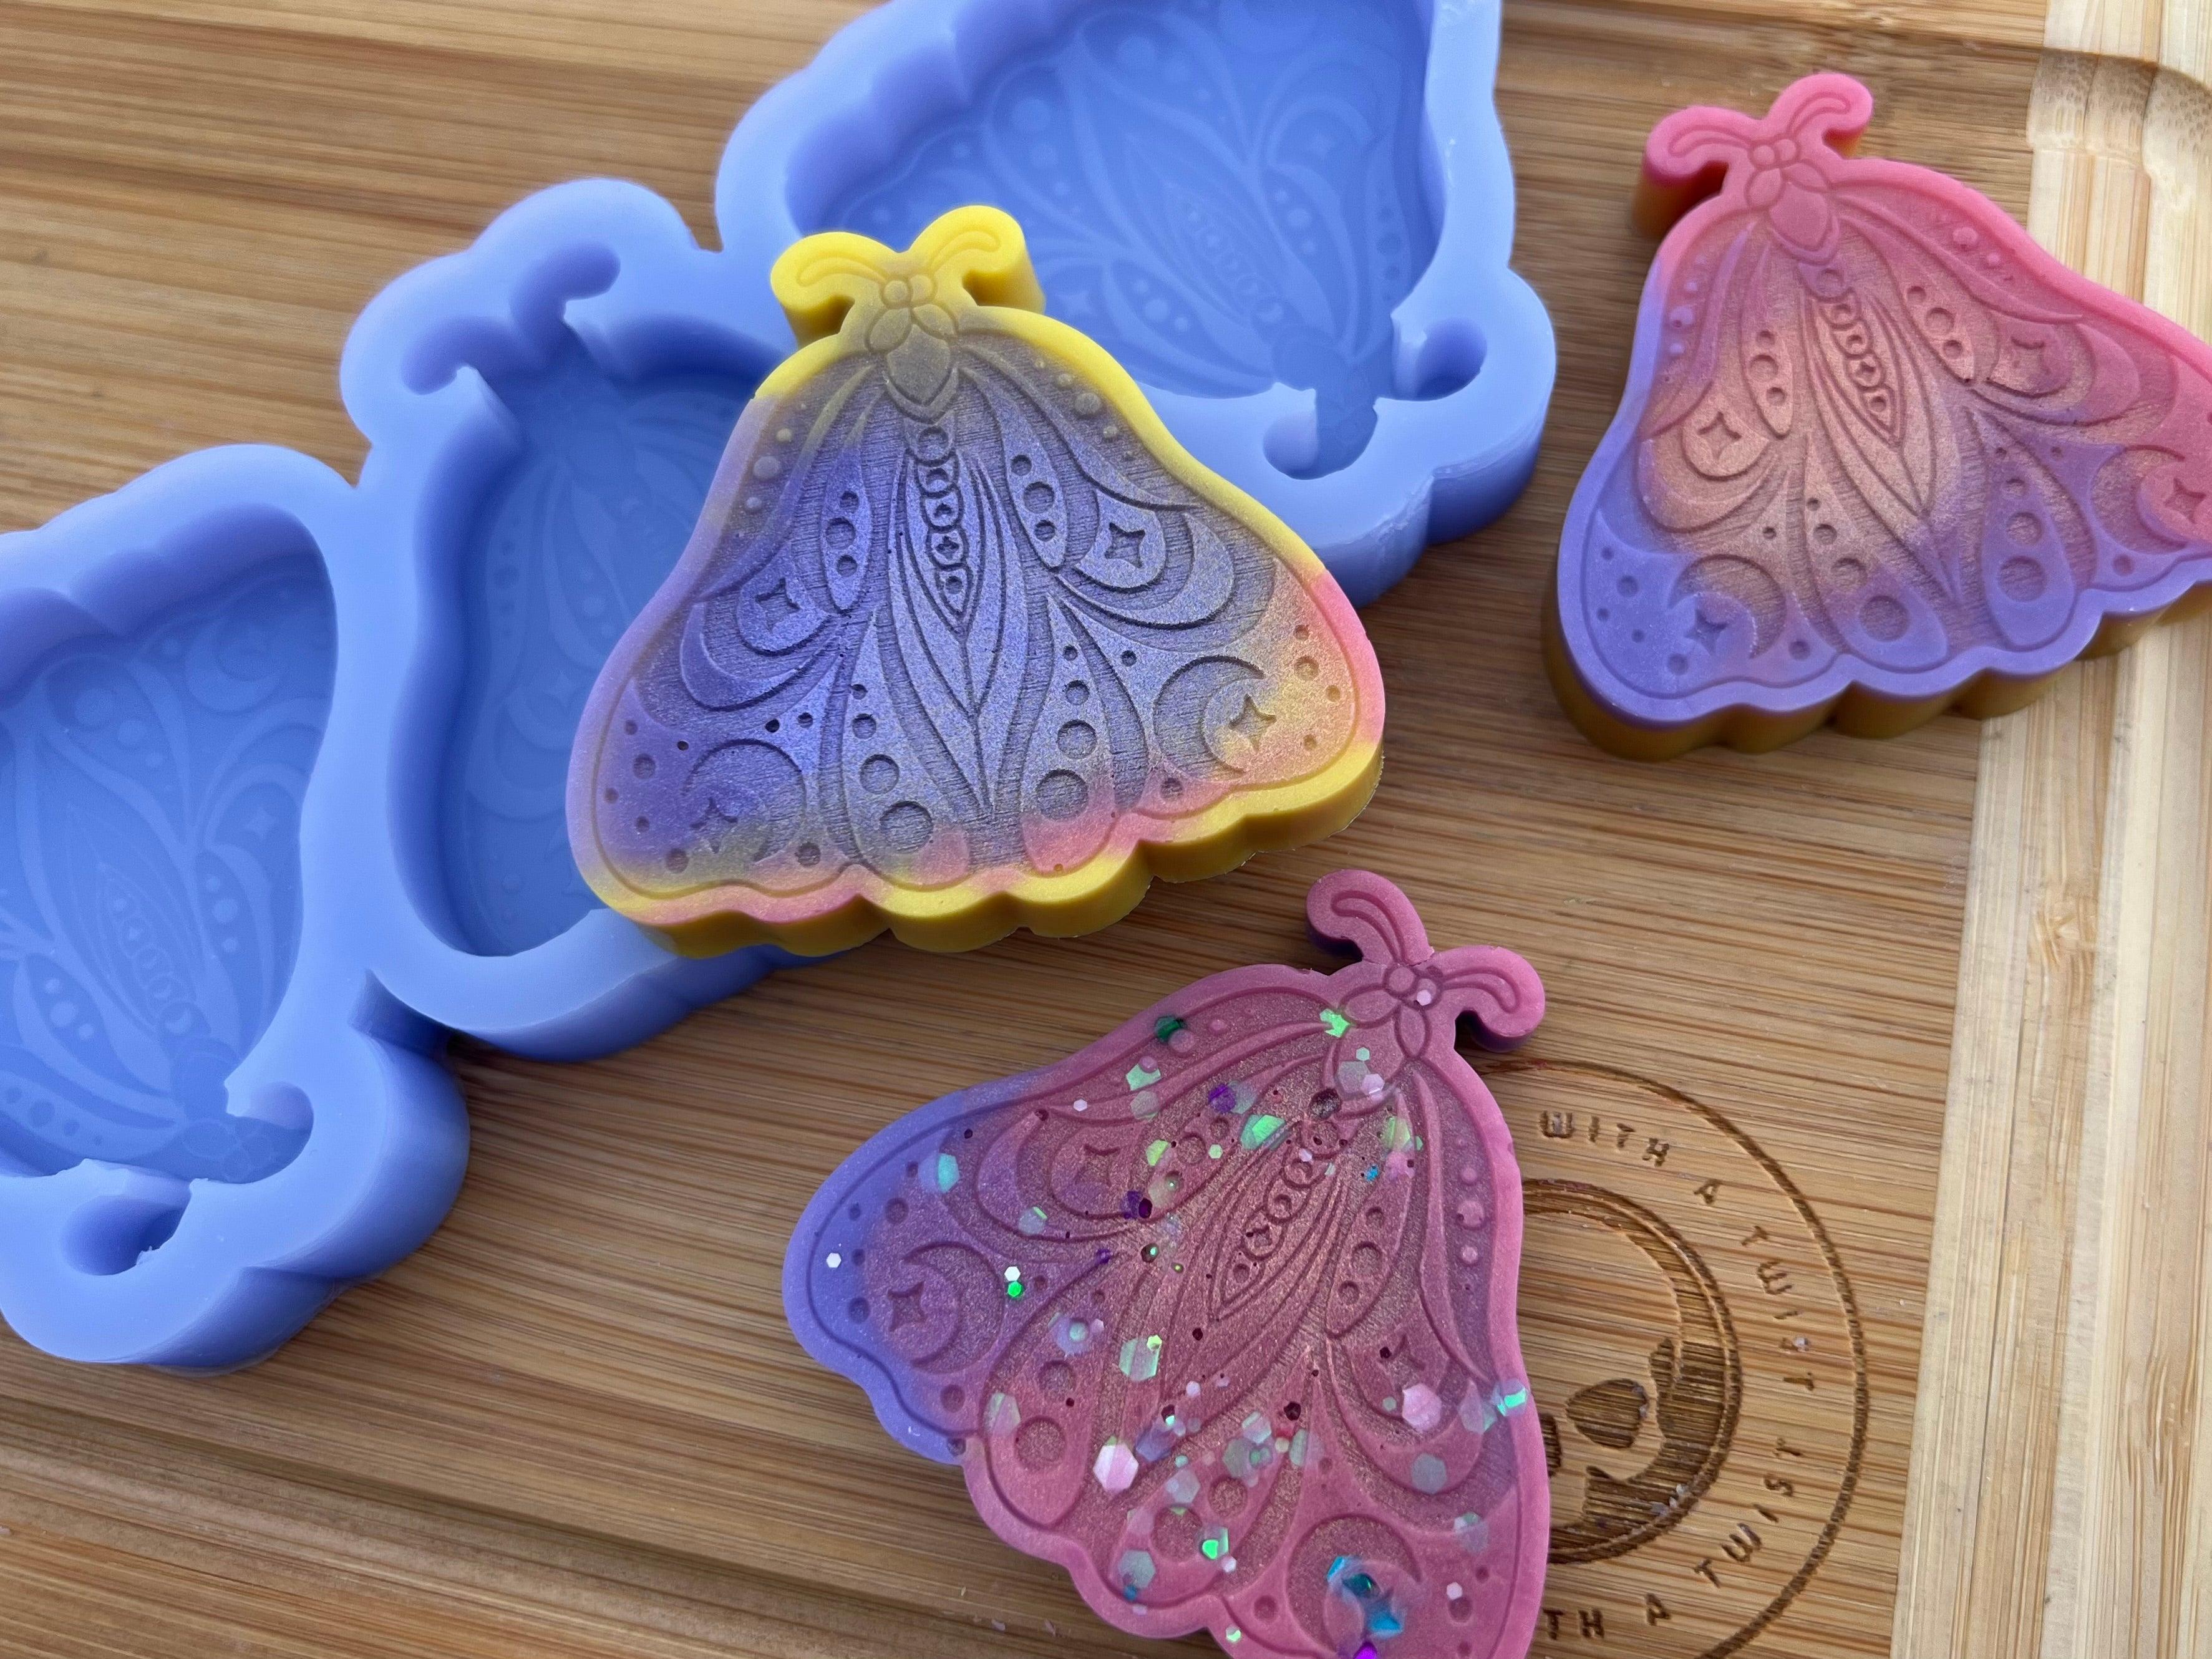 Lunar Moth Wax Melt Silicone Mold - Designed with a Twist - Top quality silicone molds made in the UK.